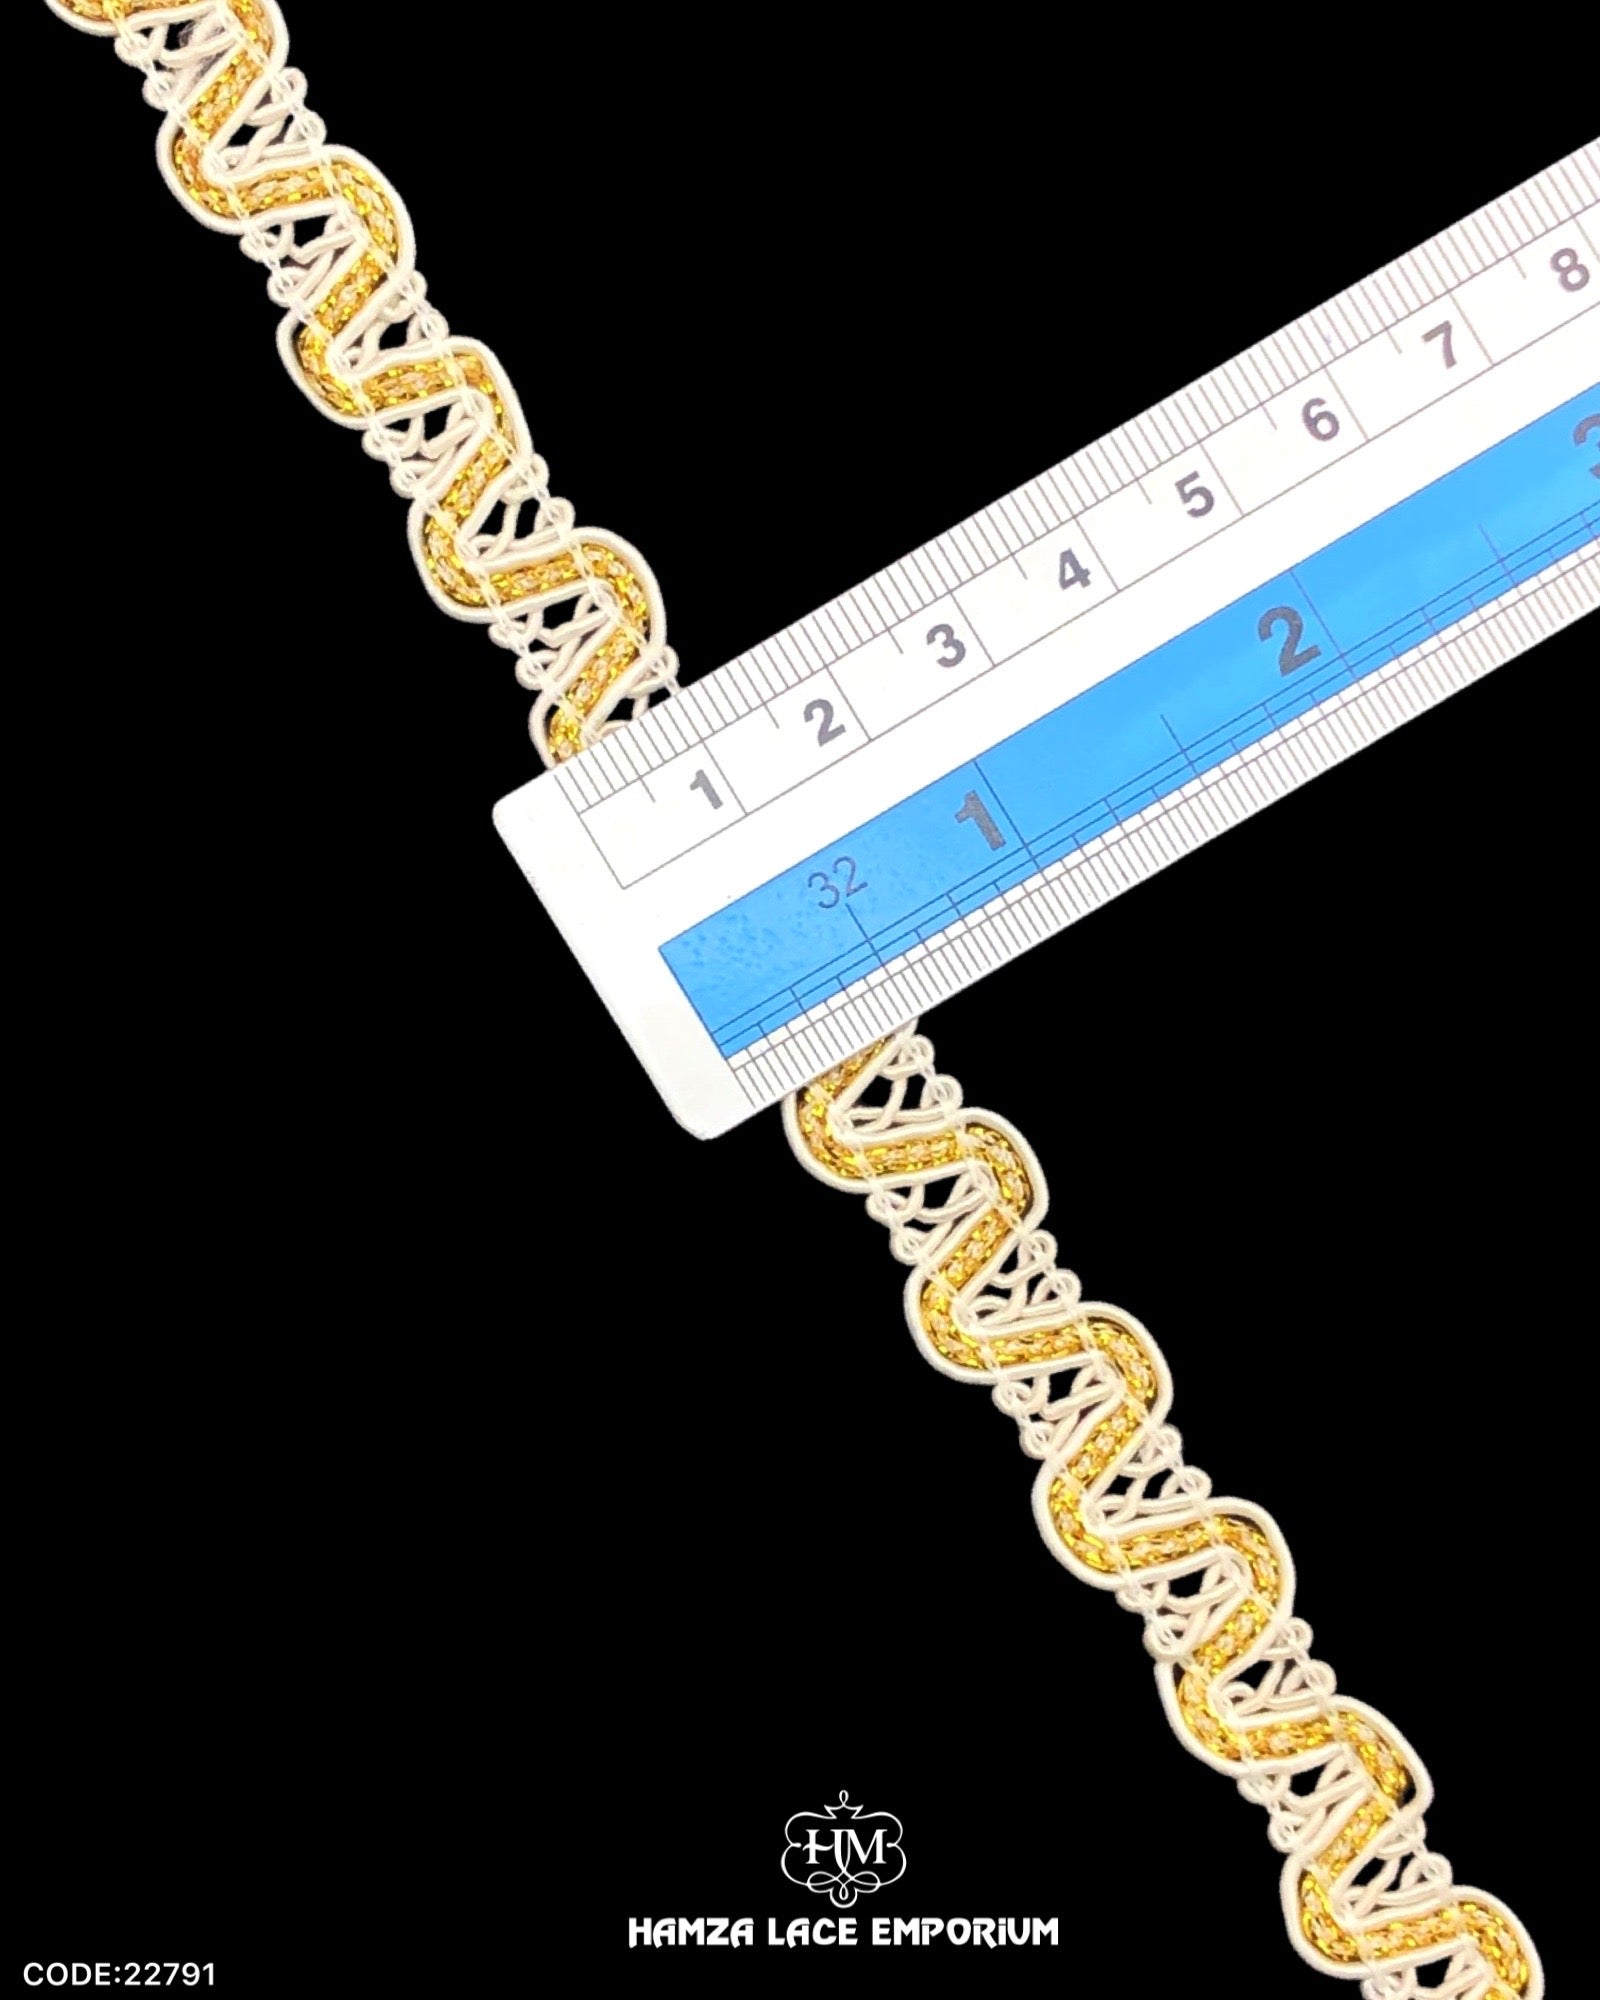 Size of the 'Zig Zag Tilla Lace 22791' is displayed with the help of a ruler